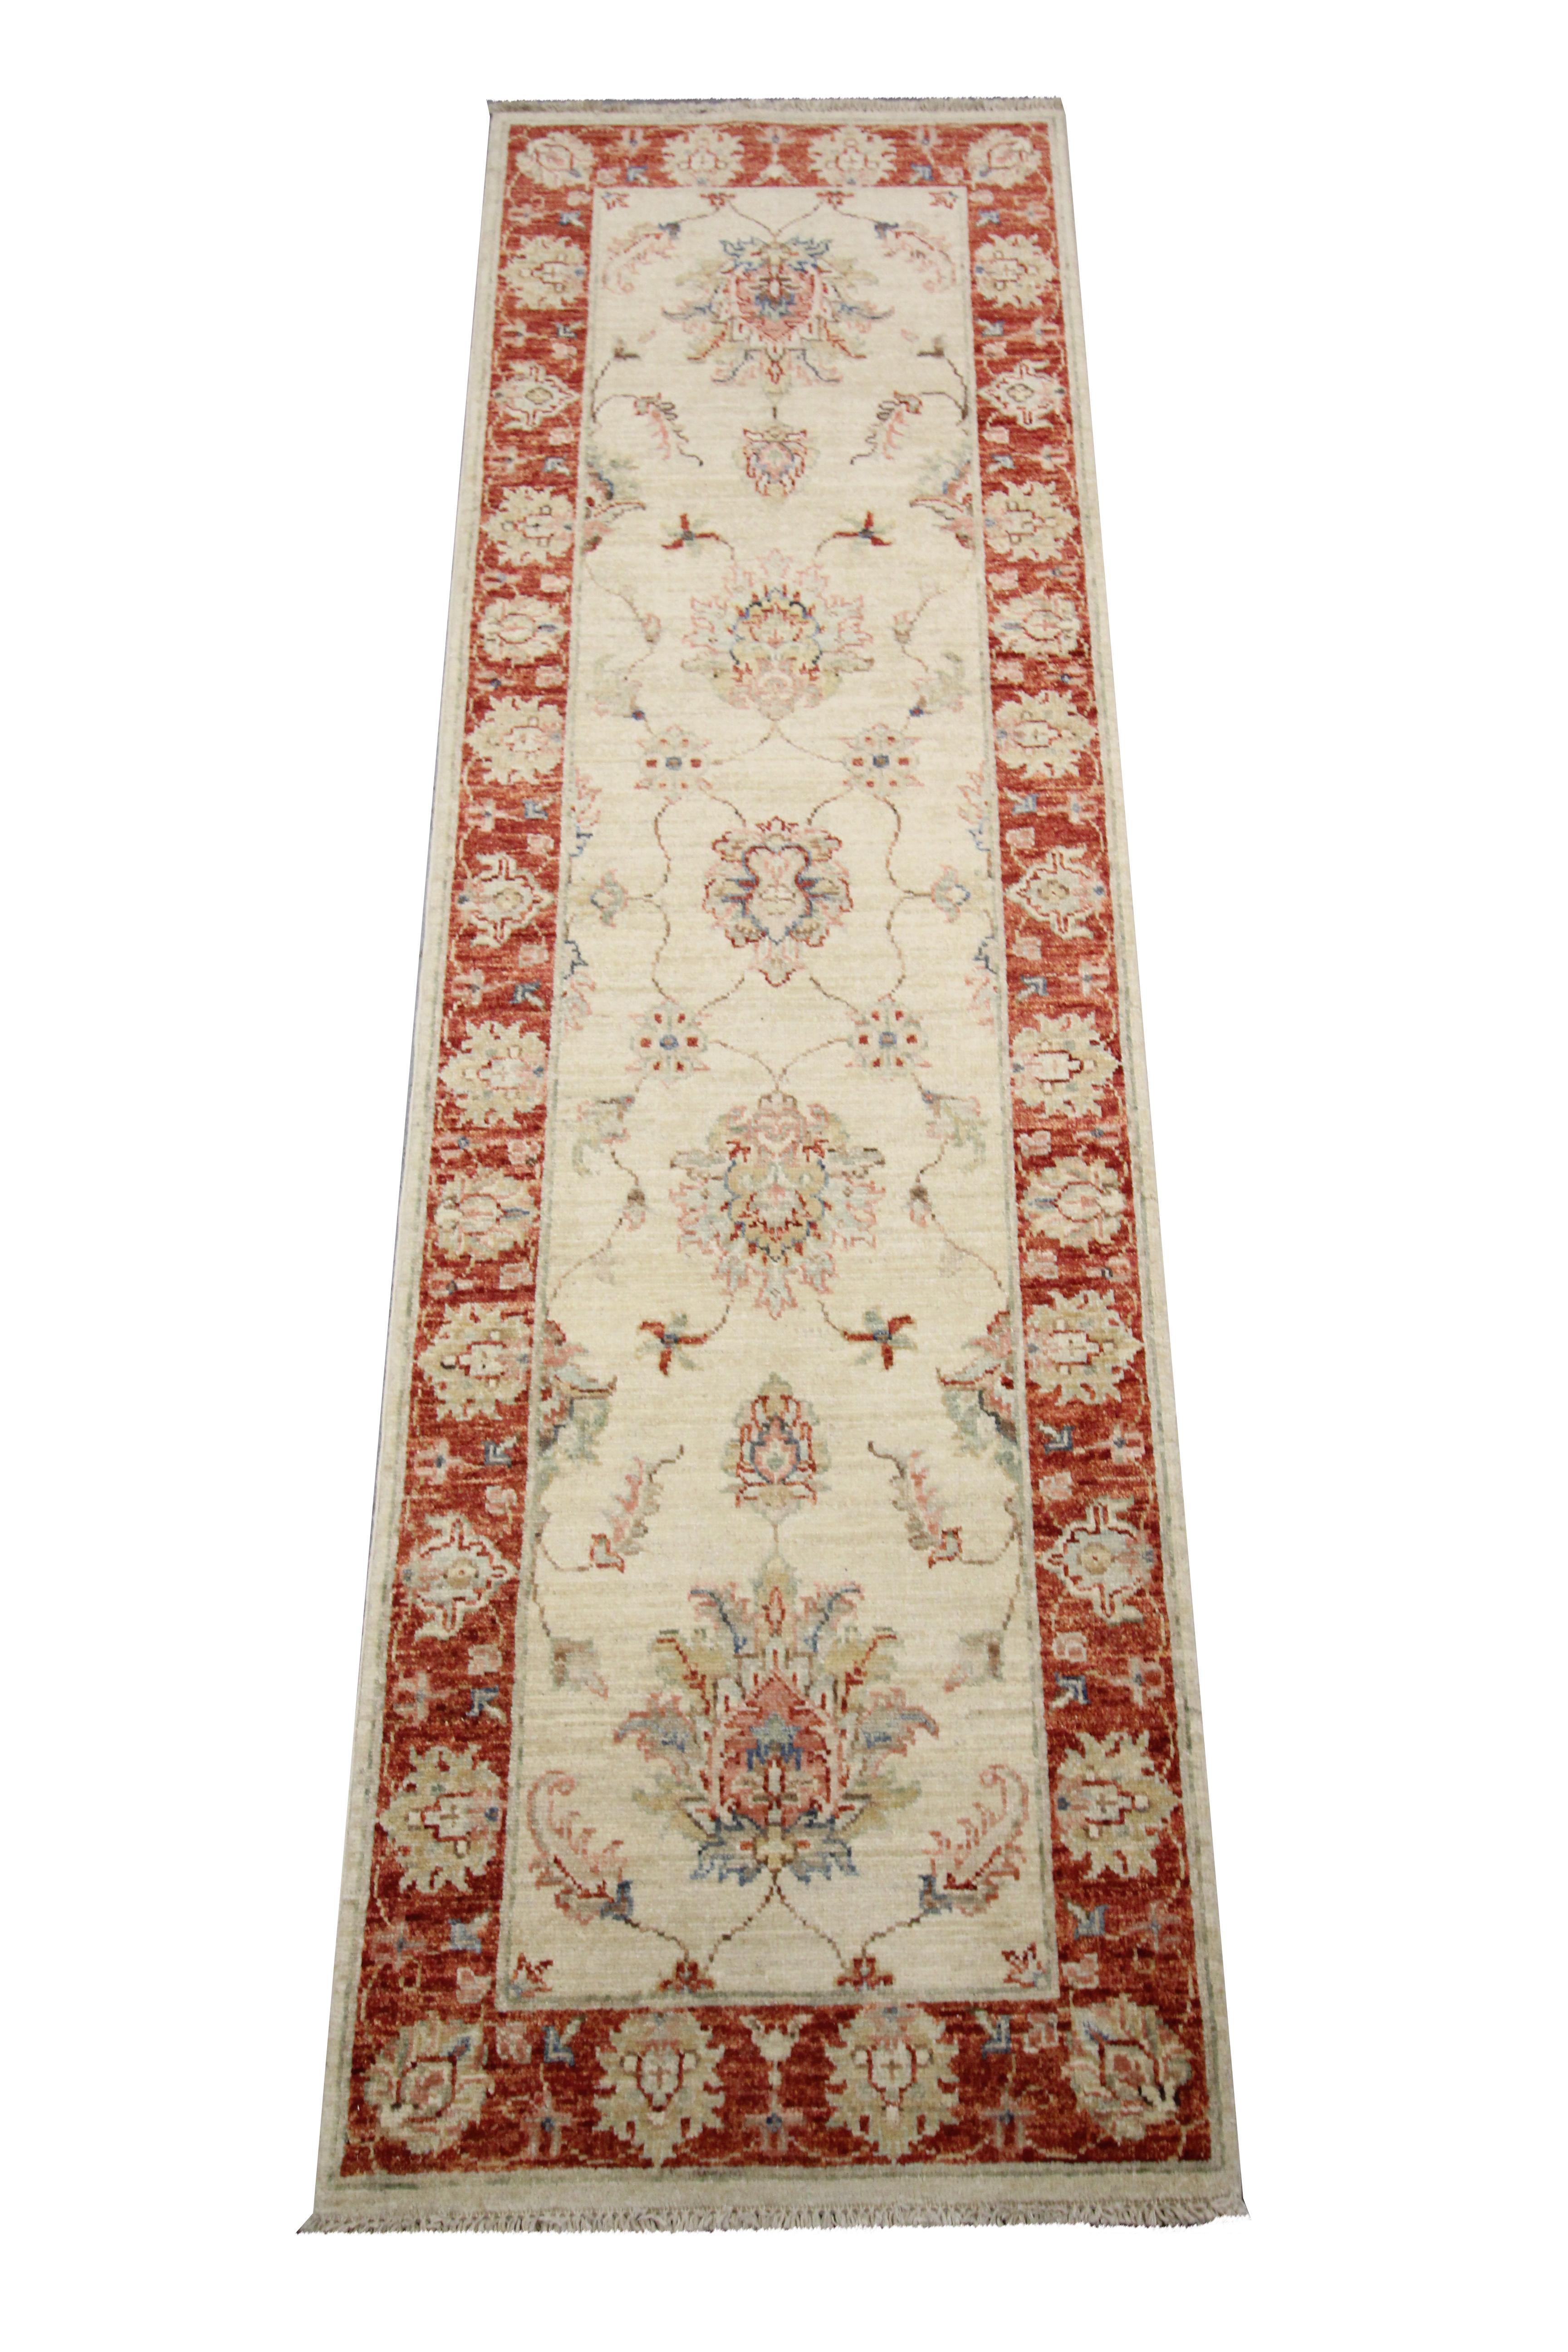 This elegant wool runner rug is a handwoven vintage carpet constructed by hand with a traditional Ziegler design. The central design has been woven on a simple cream background with a long-established traditional floral design woven in red and beige